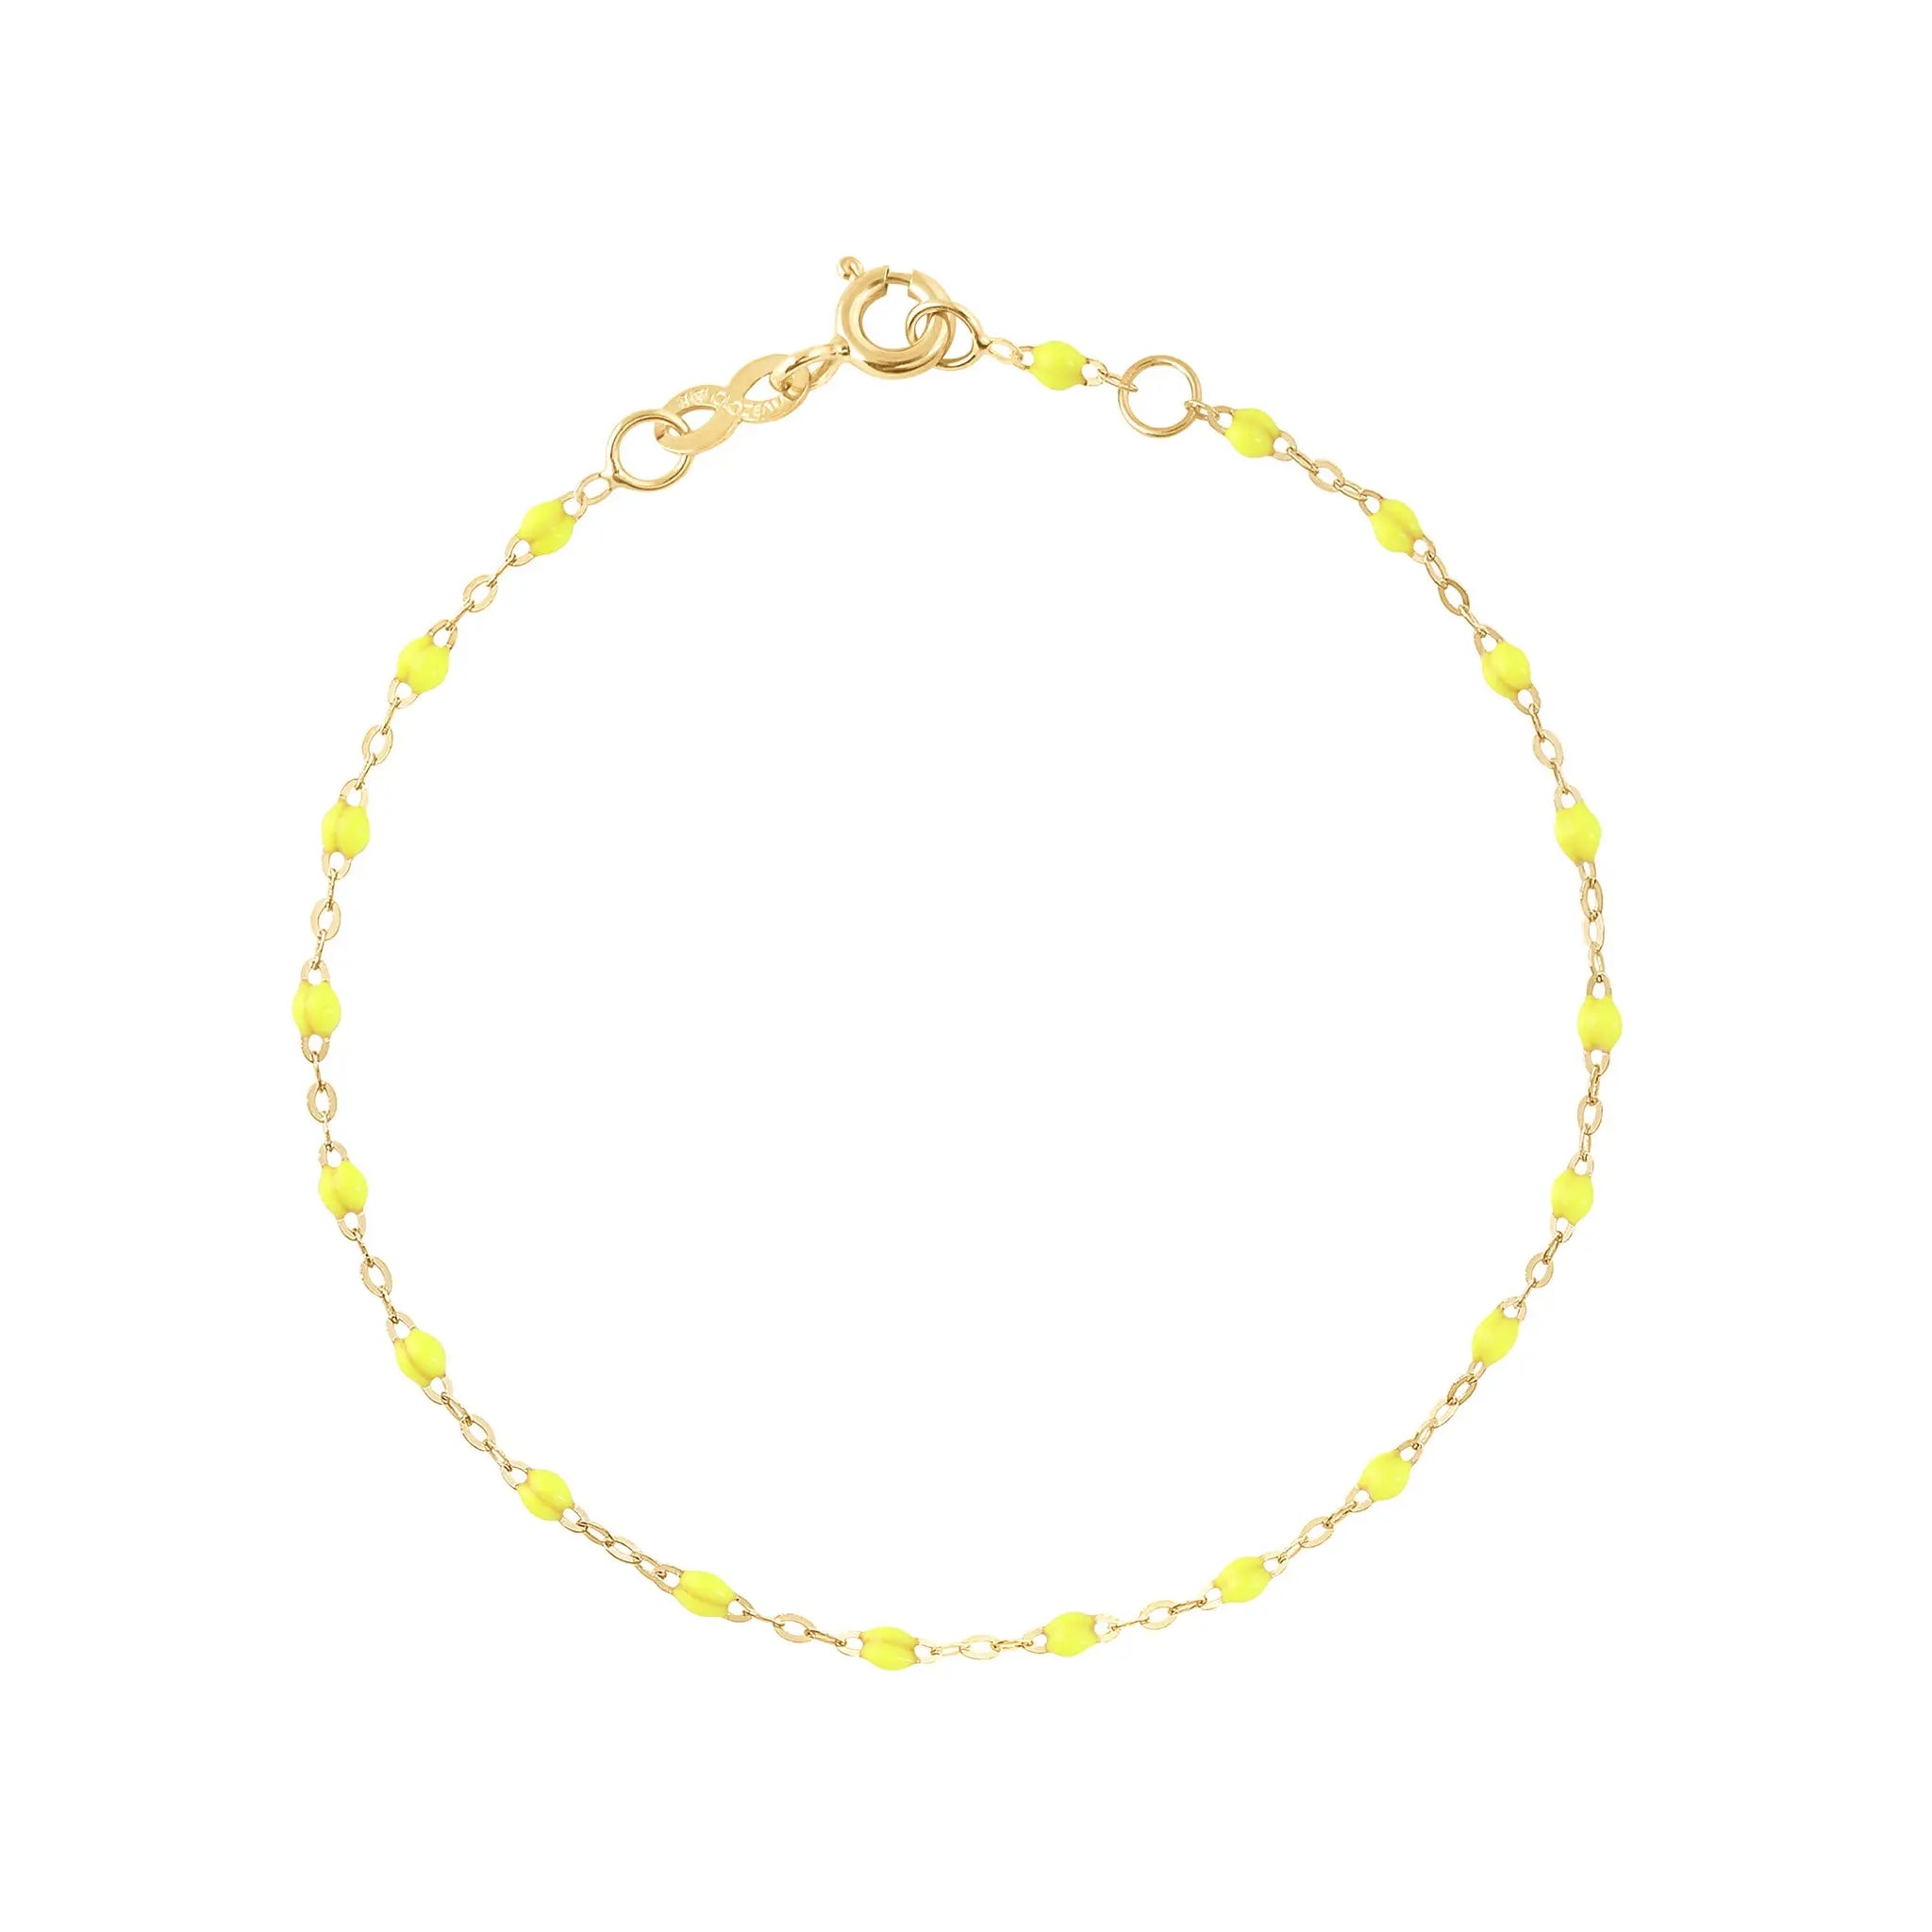 The Classic Gigi bracelet by gigi CLOZEAU features 18K Yellow Gold, and unique Lime jewels for a simple, everyday look.   Each jewel is unique, artisanally made in their family-owned workshop. 18K yellow gold and resin. The bracelet measures 6.7 inches with adjustable clasp at 6.3 inches.